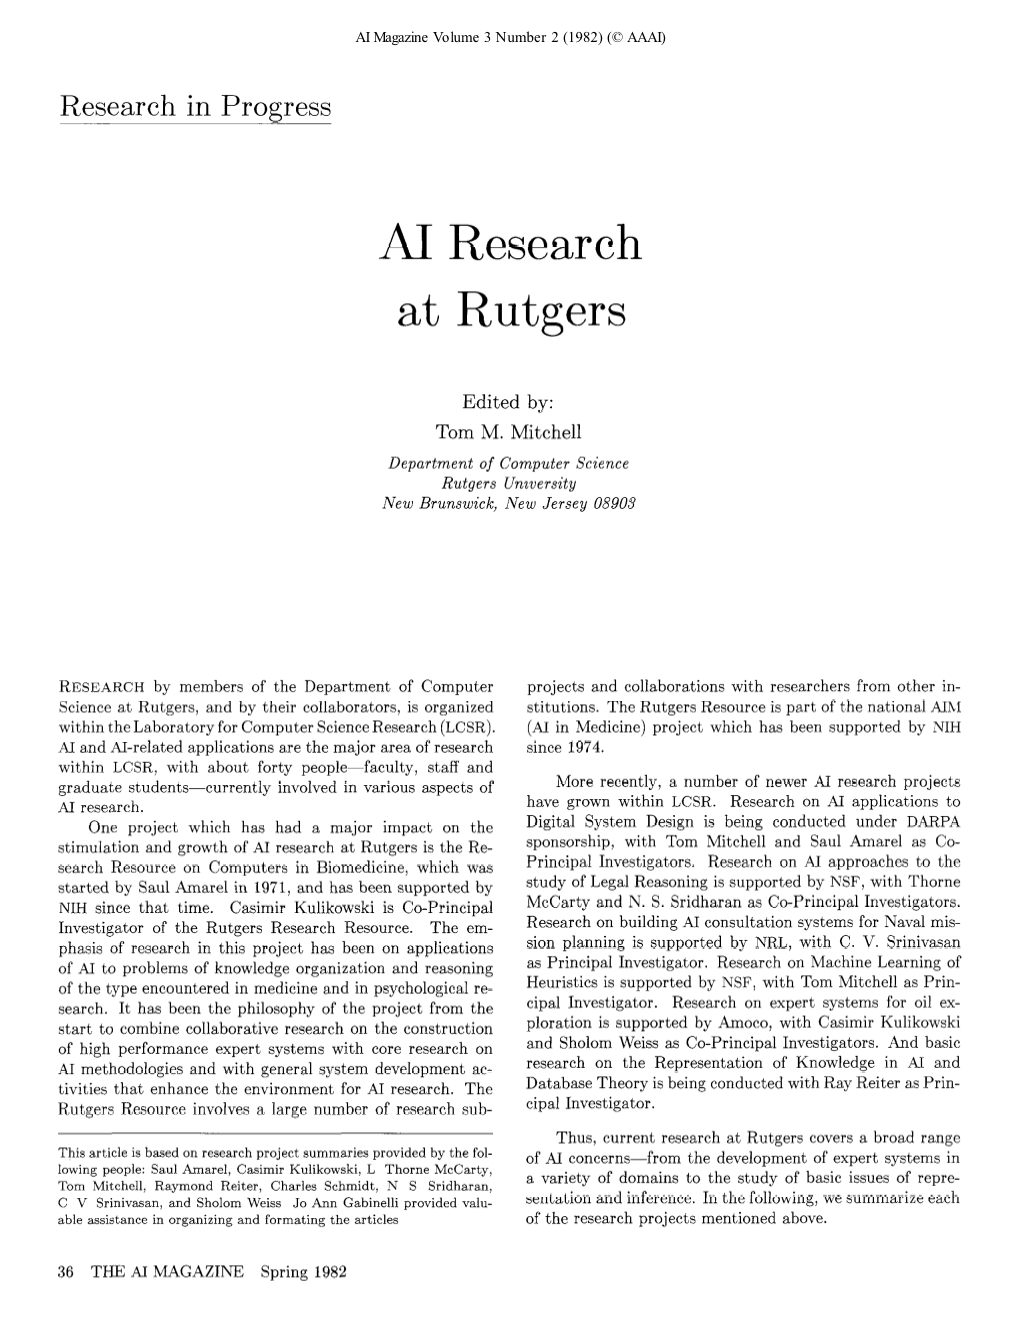 Artificial Intelligence Research at Rutgers